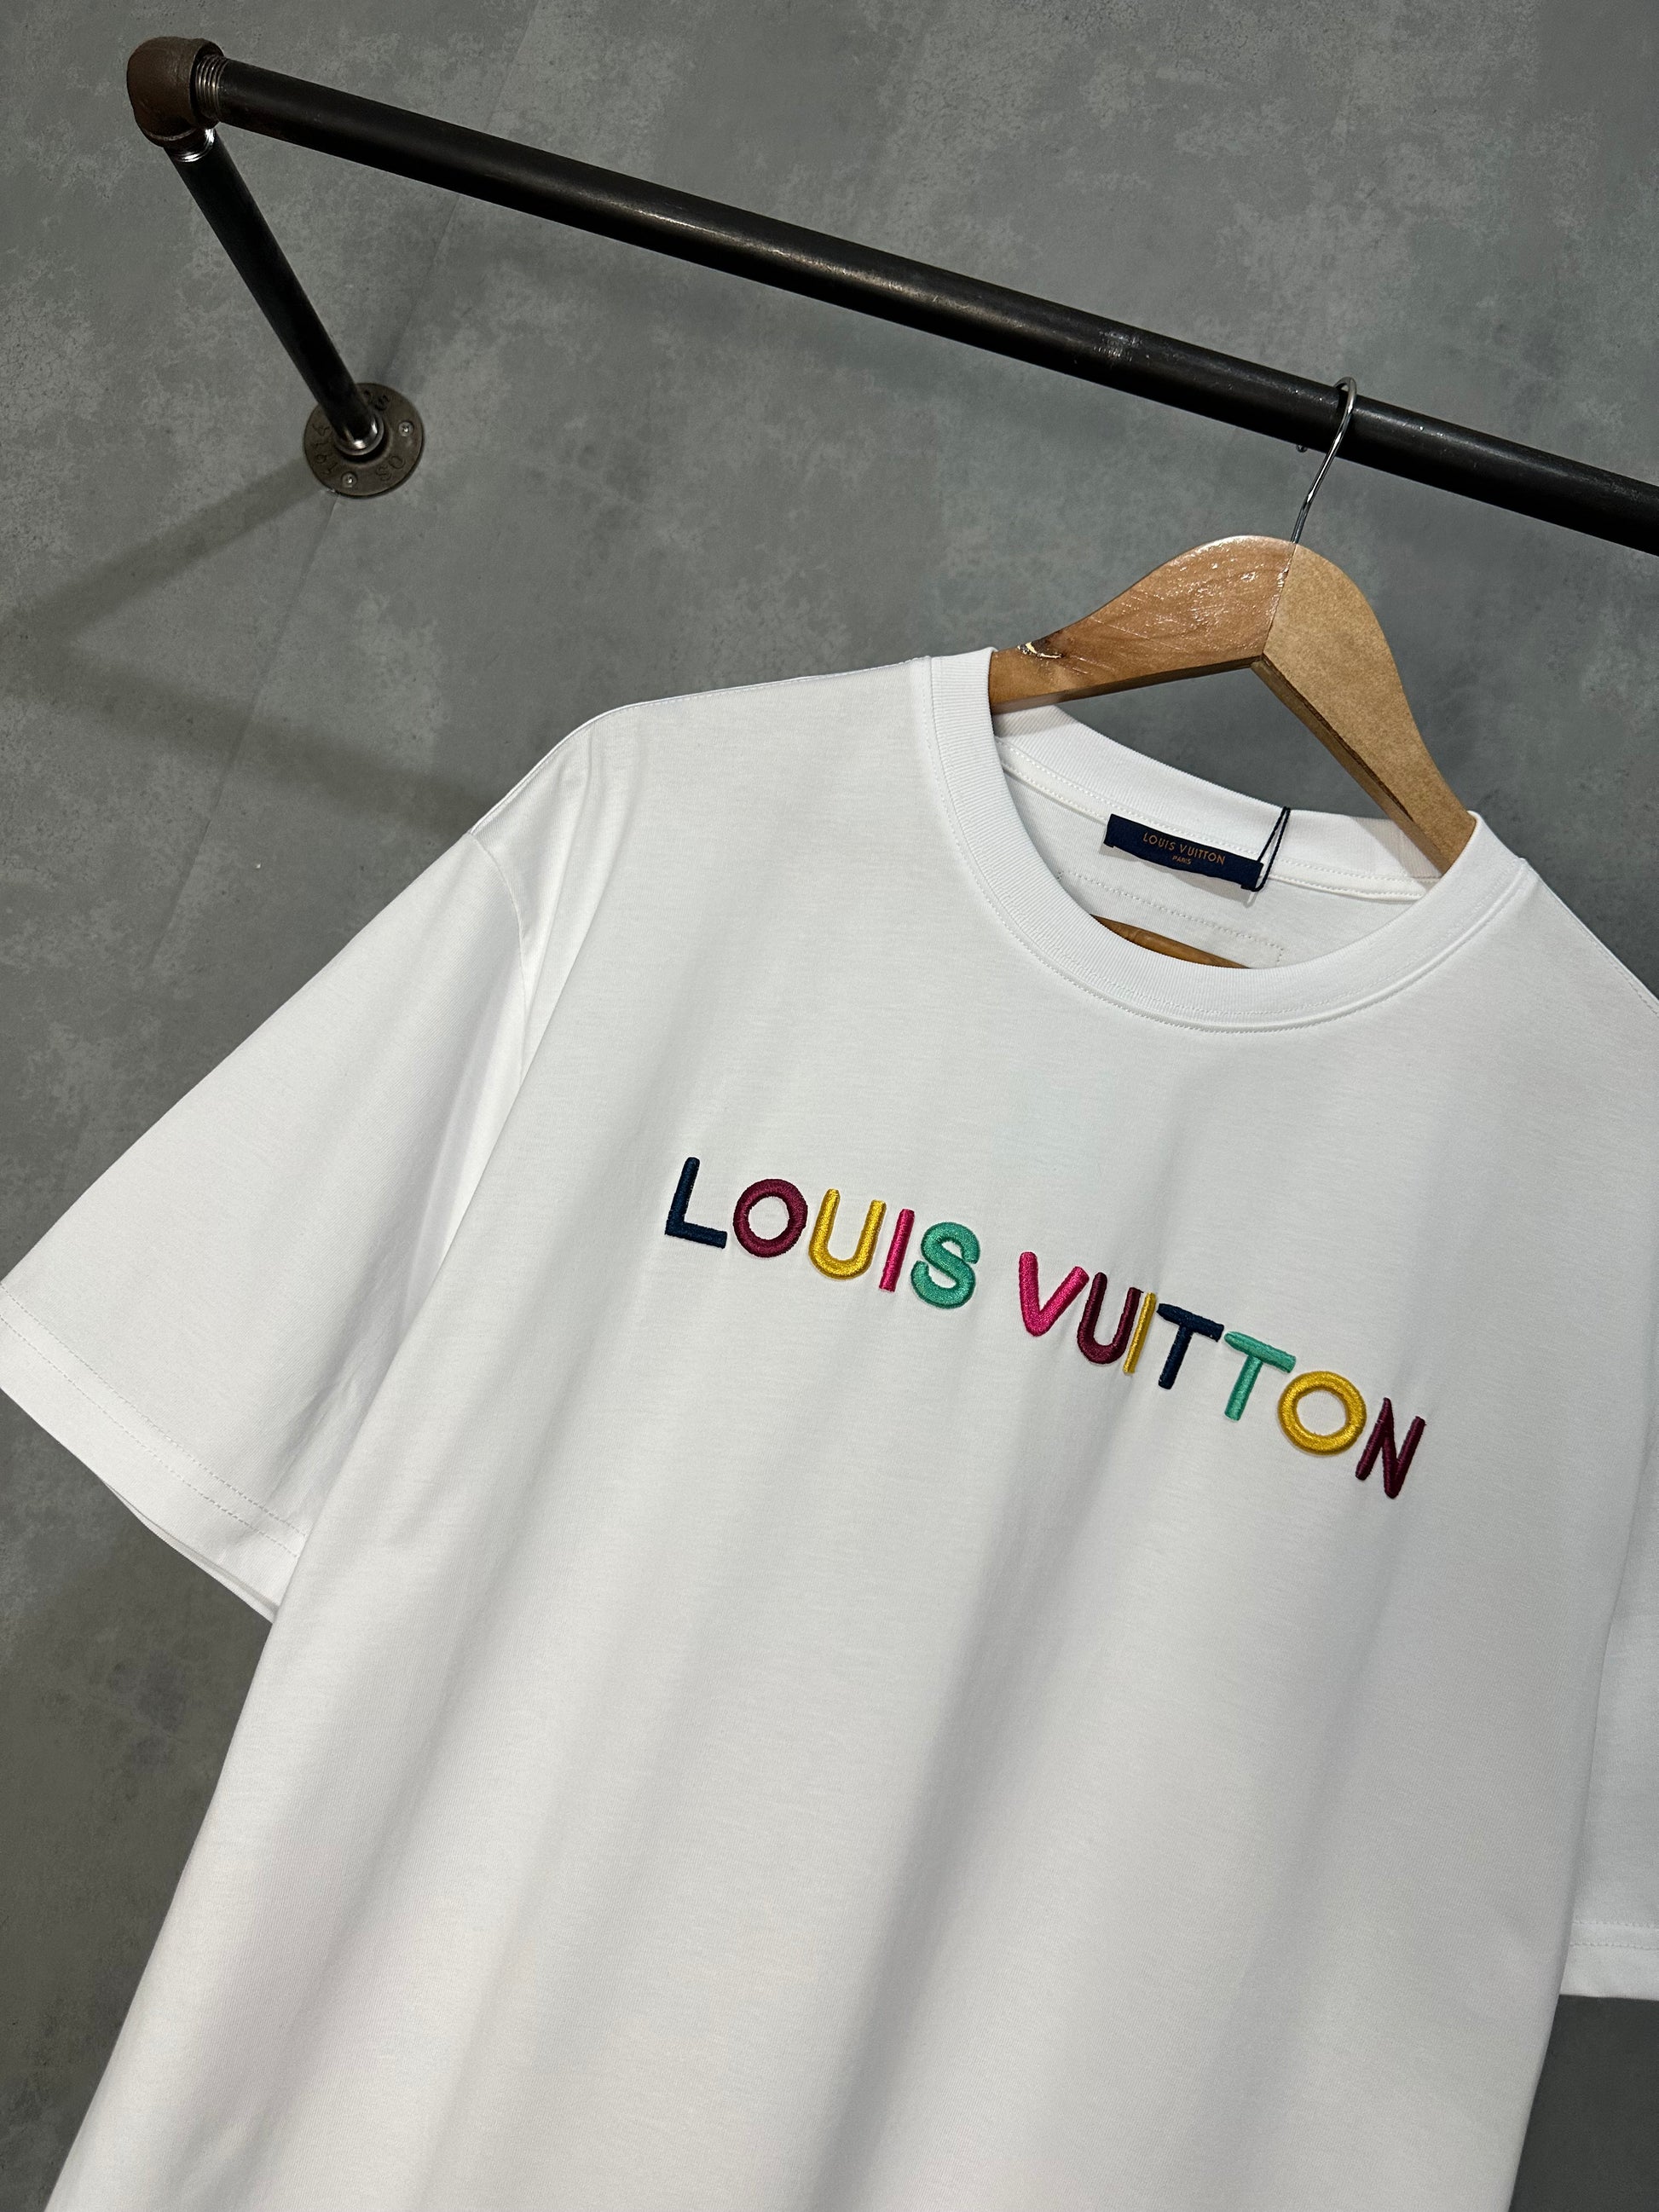 Louis Vuitton T-Shirt – Dad from MNL